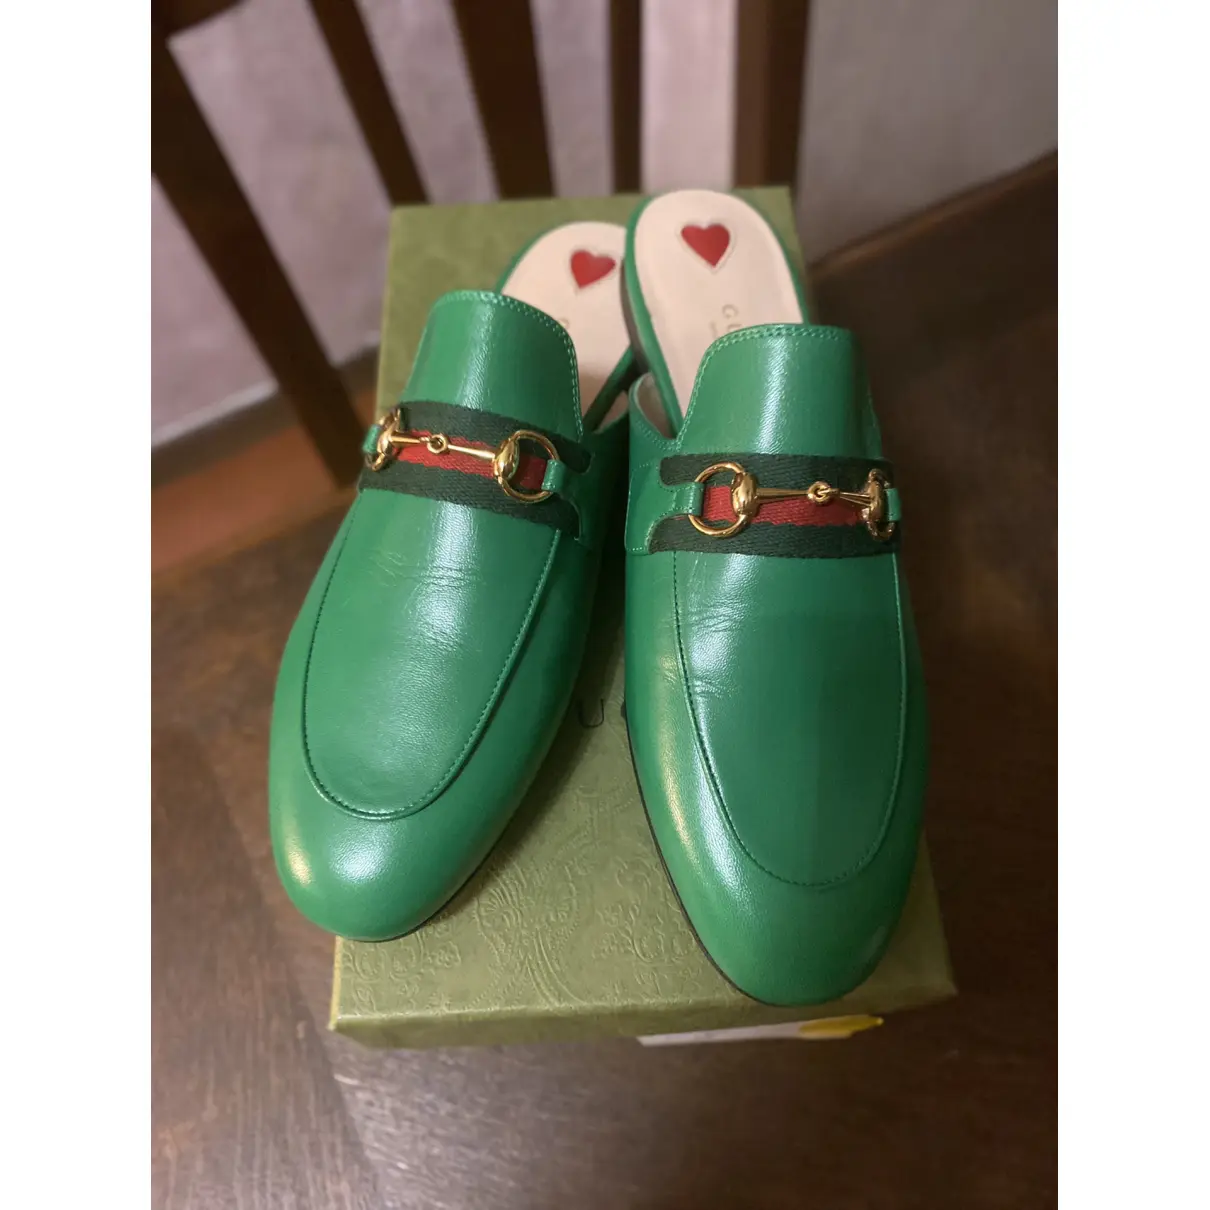 Buy Gucci Princetown leather mules online